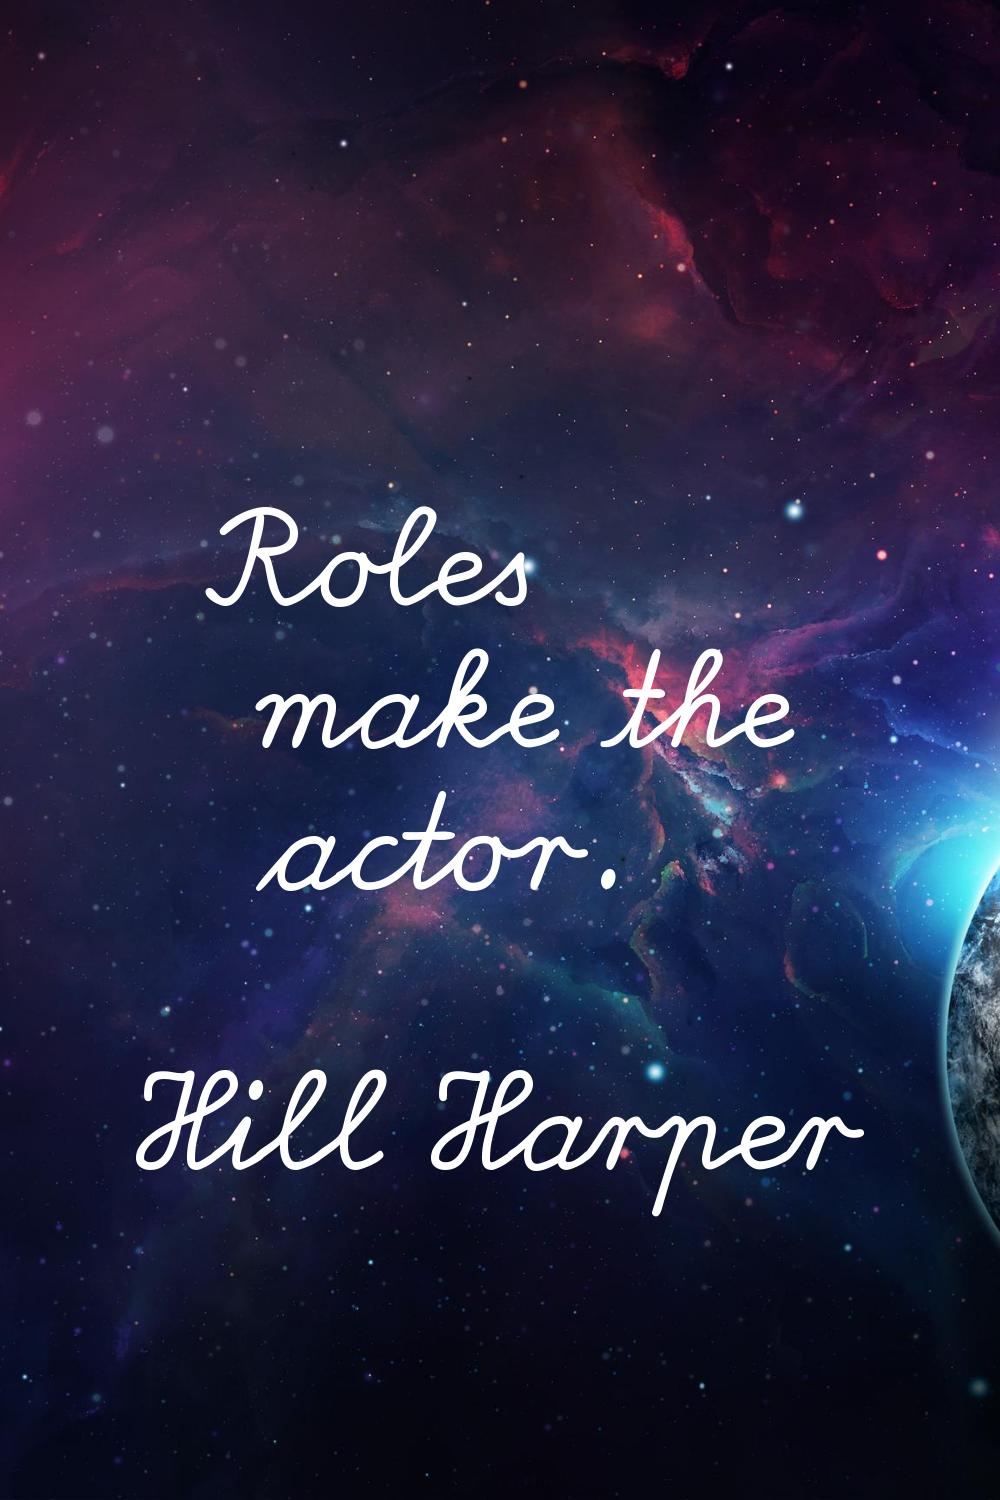 Roles make the actor.